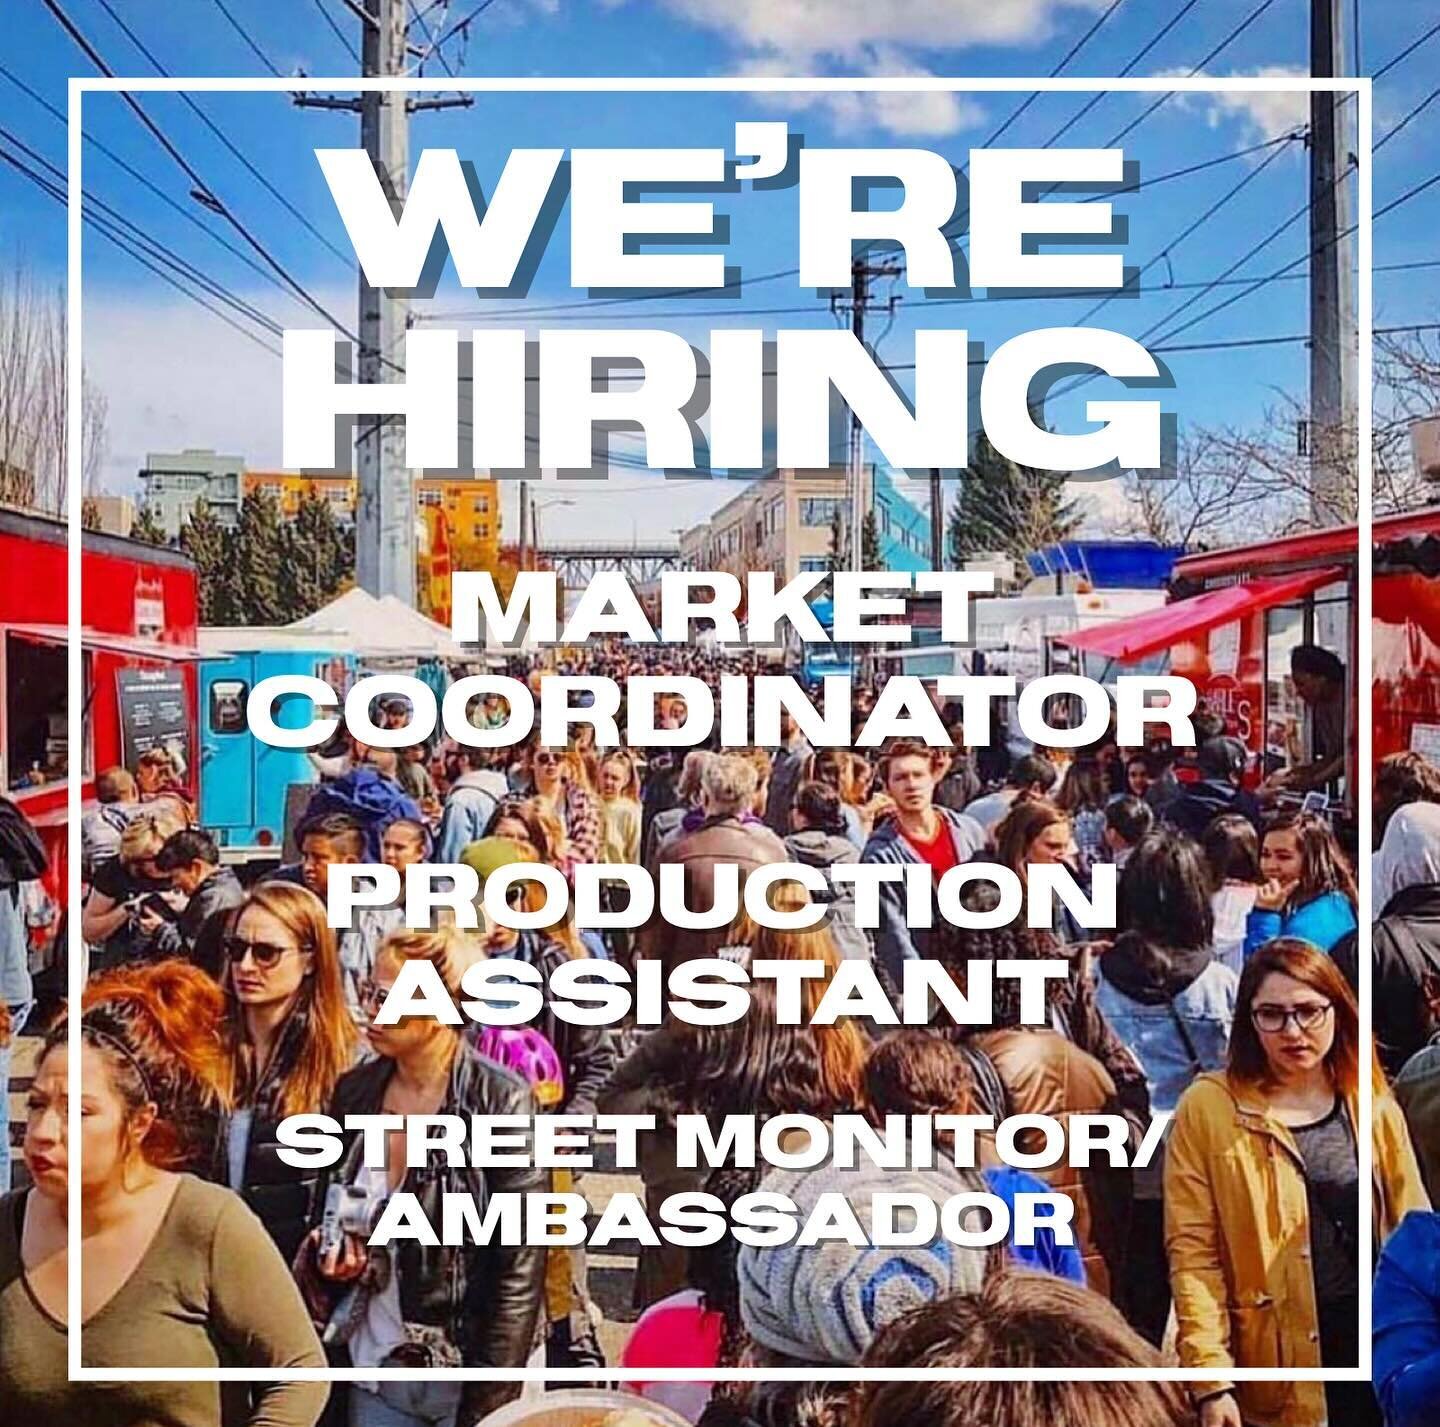 WE&rsquo;RE HIRING! Love supporting your small business community, working outdoors and love people? Join the team this Spring at Northwest Marketplaces on weekends part-time for our Summer season. Many of our full-time staff get their start curbside